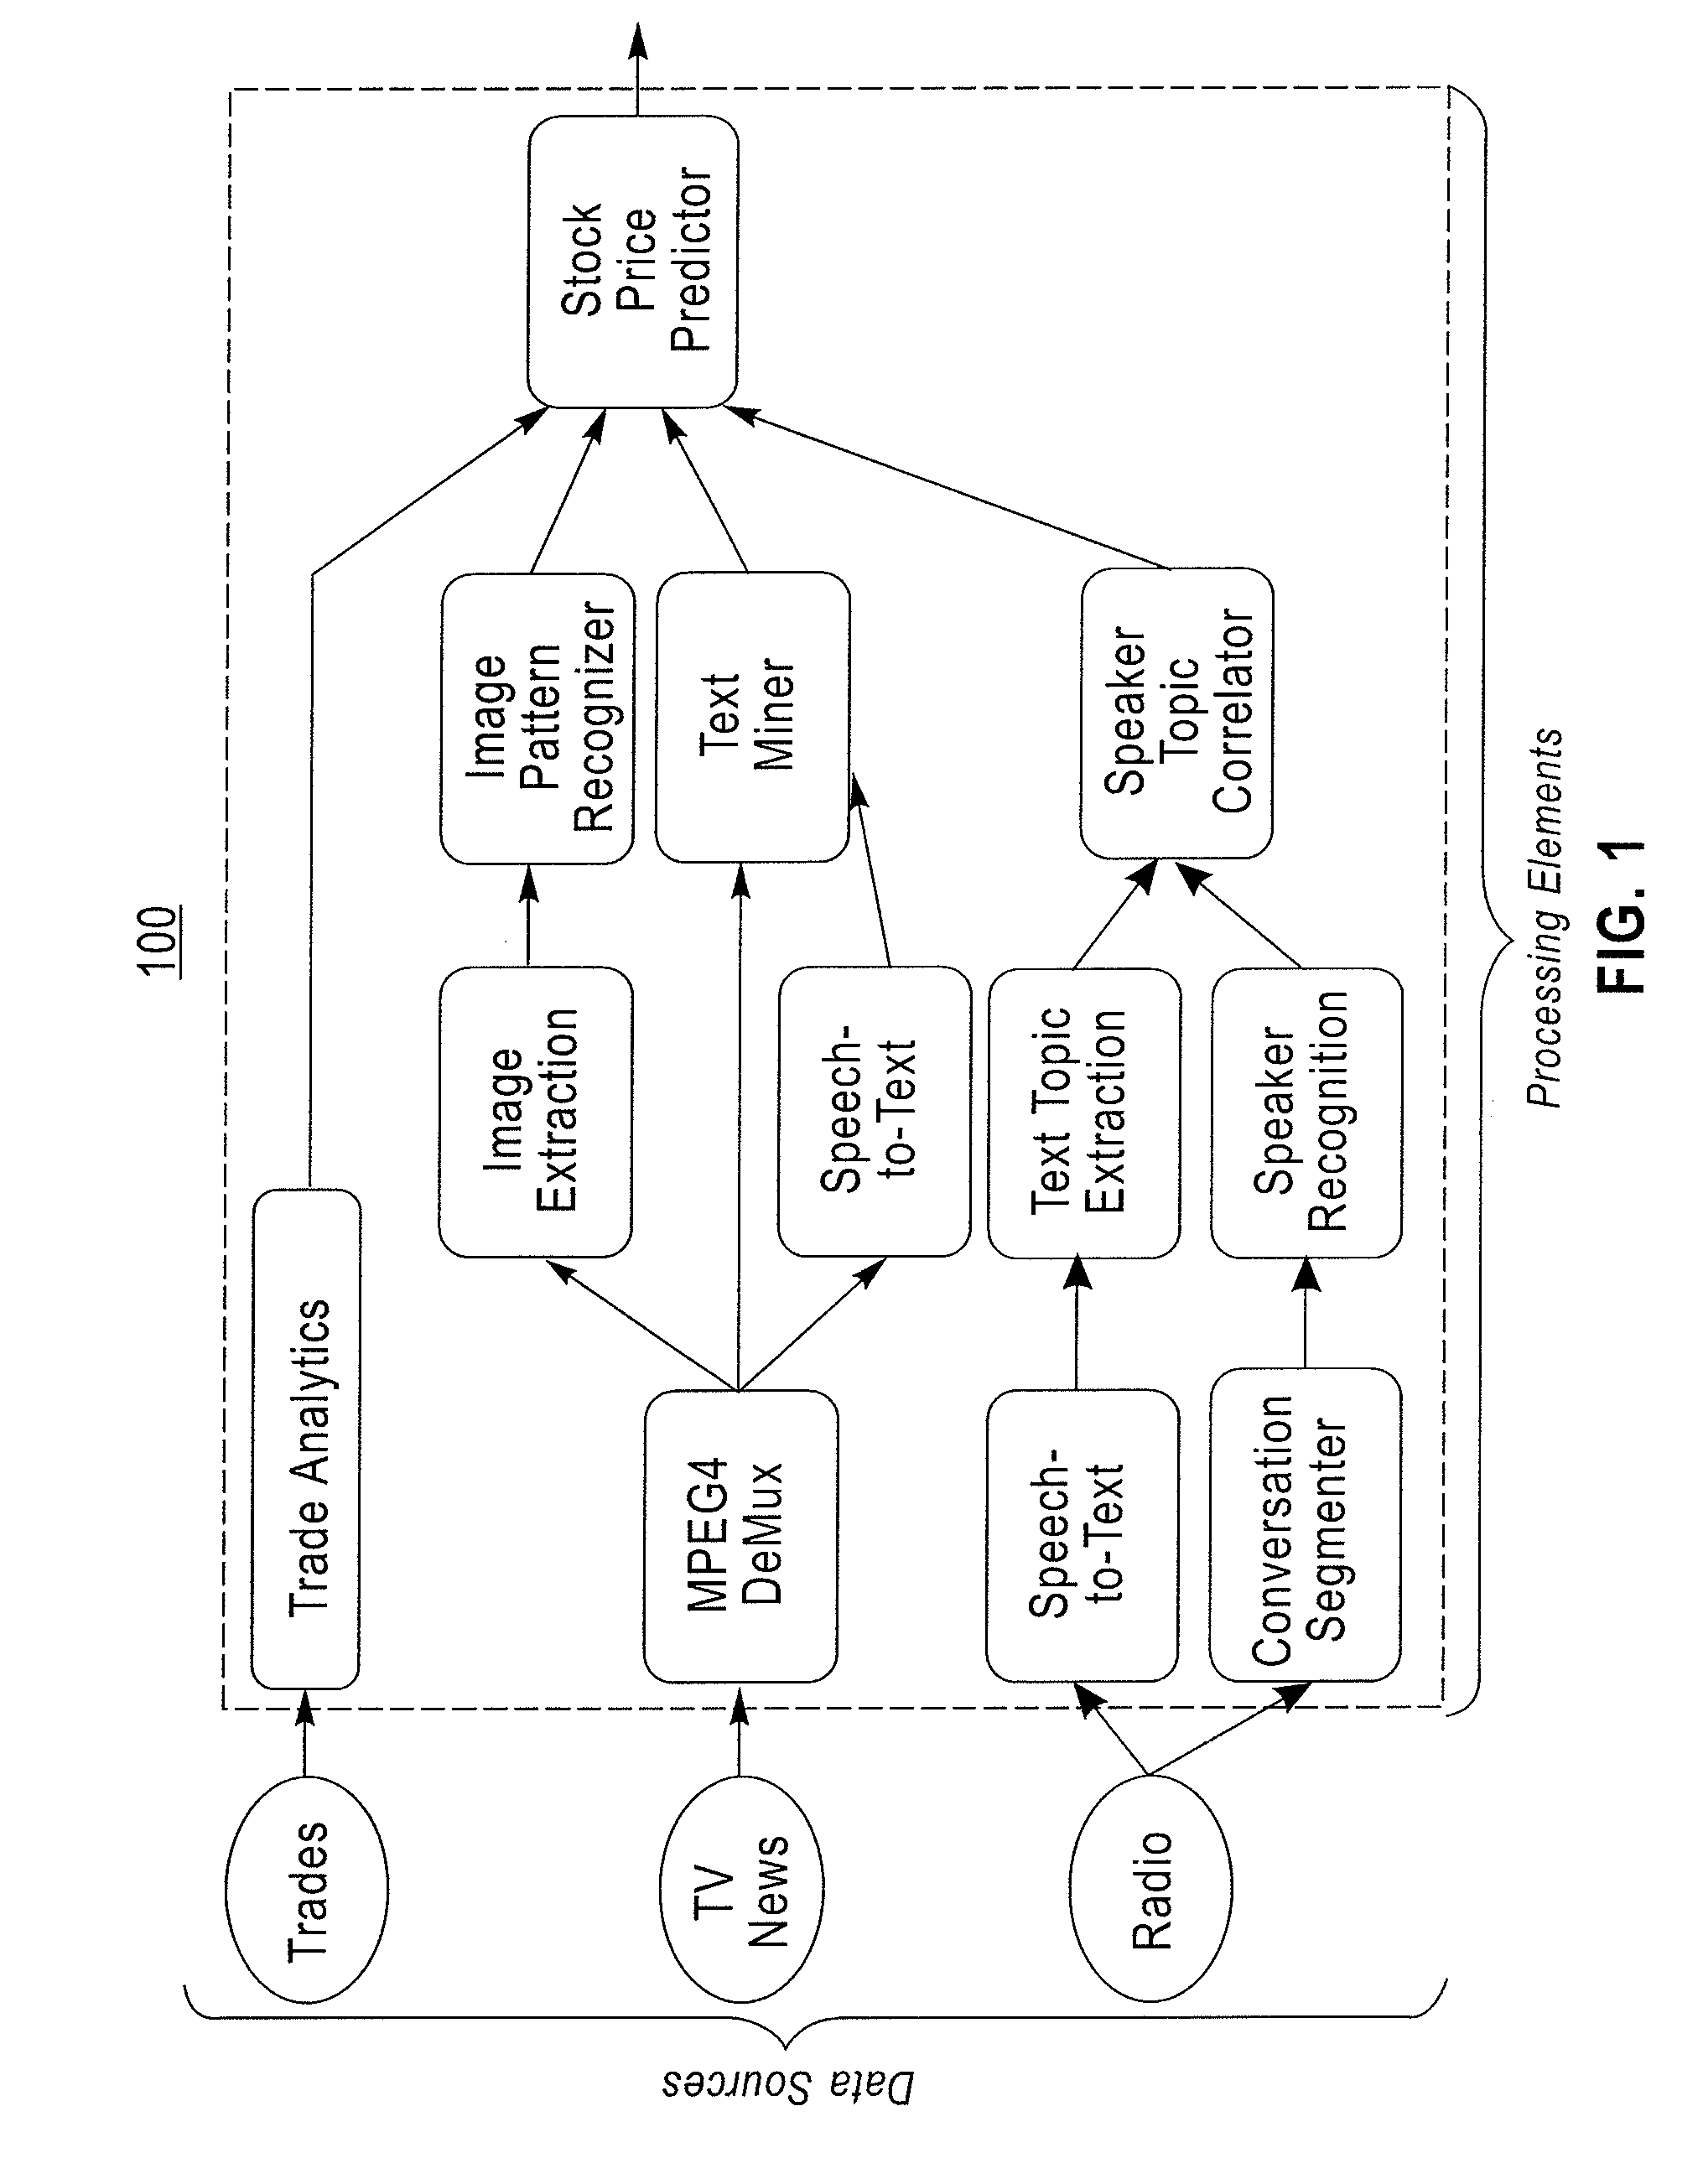 Method and system for composing stream processing applications according to a semantic description of a processing goal